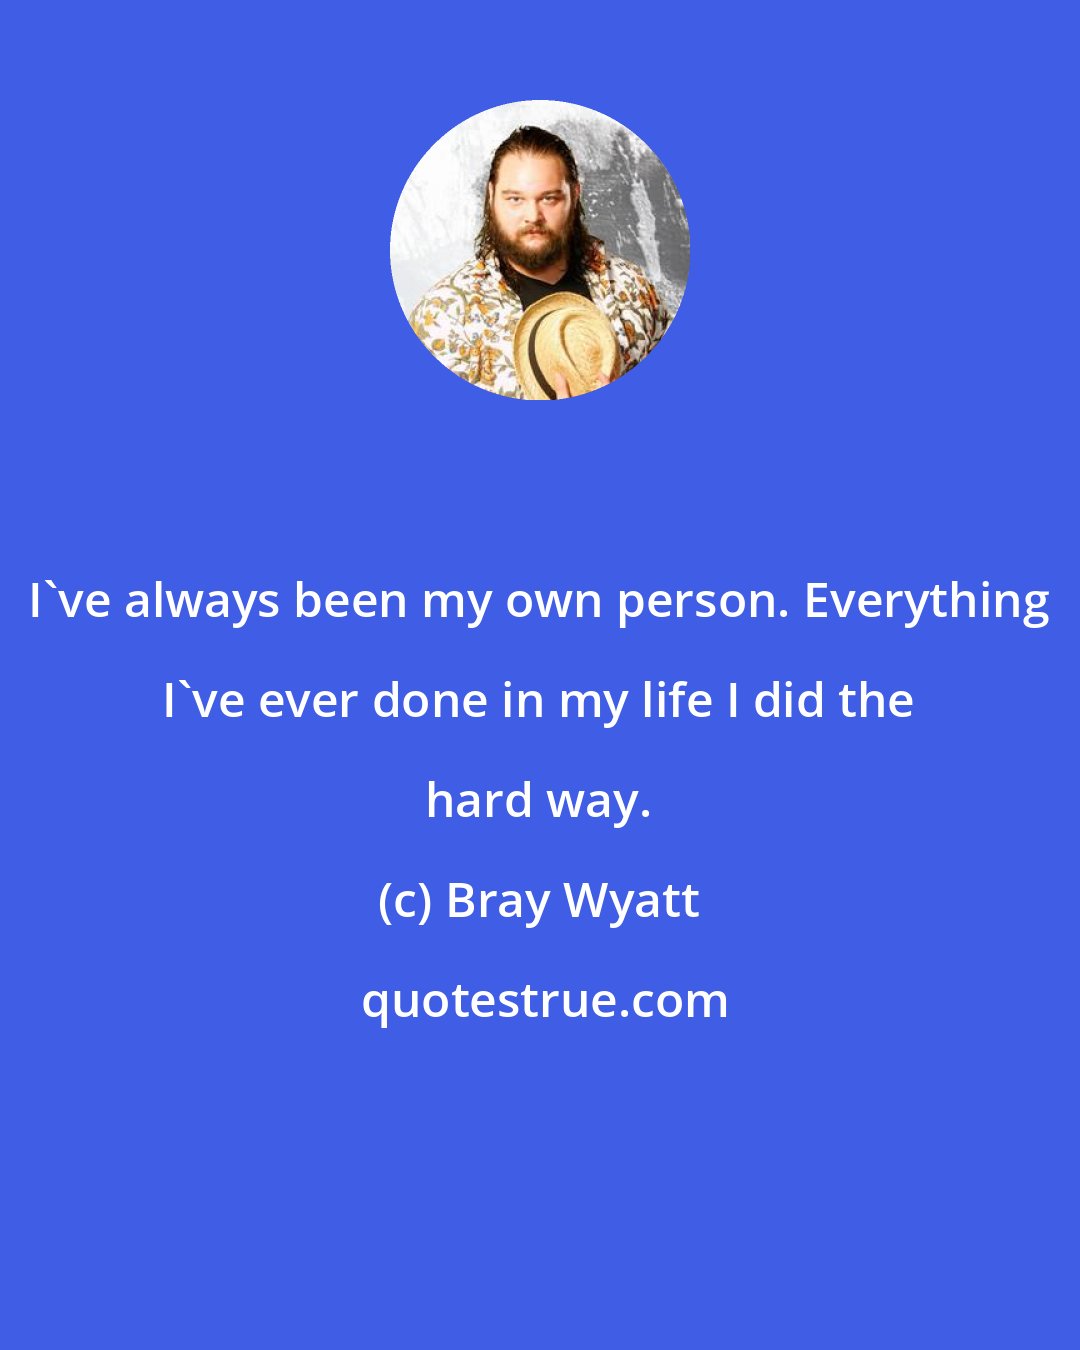 Bray Wyatt: I've always been my own person. Everything I've ever done in my life I did the hard way.